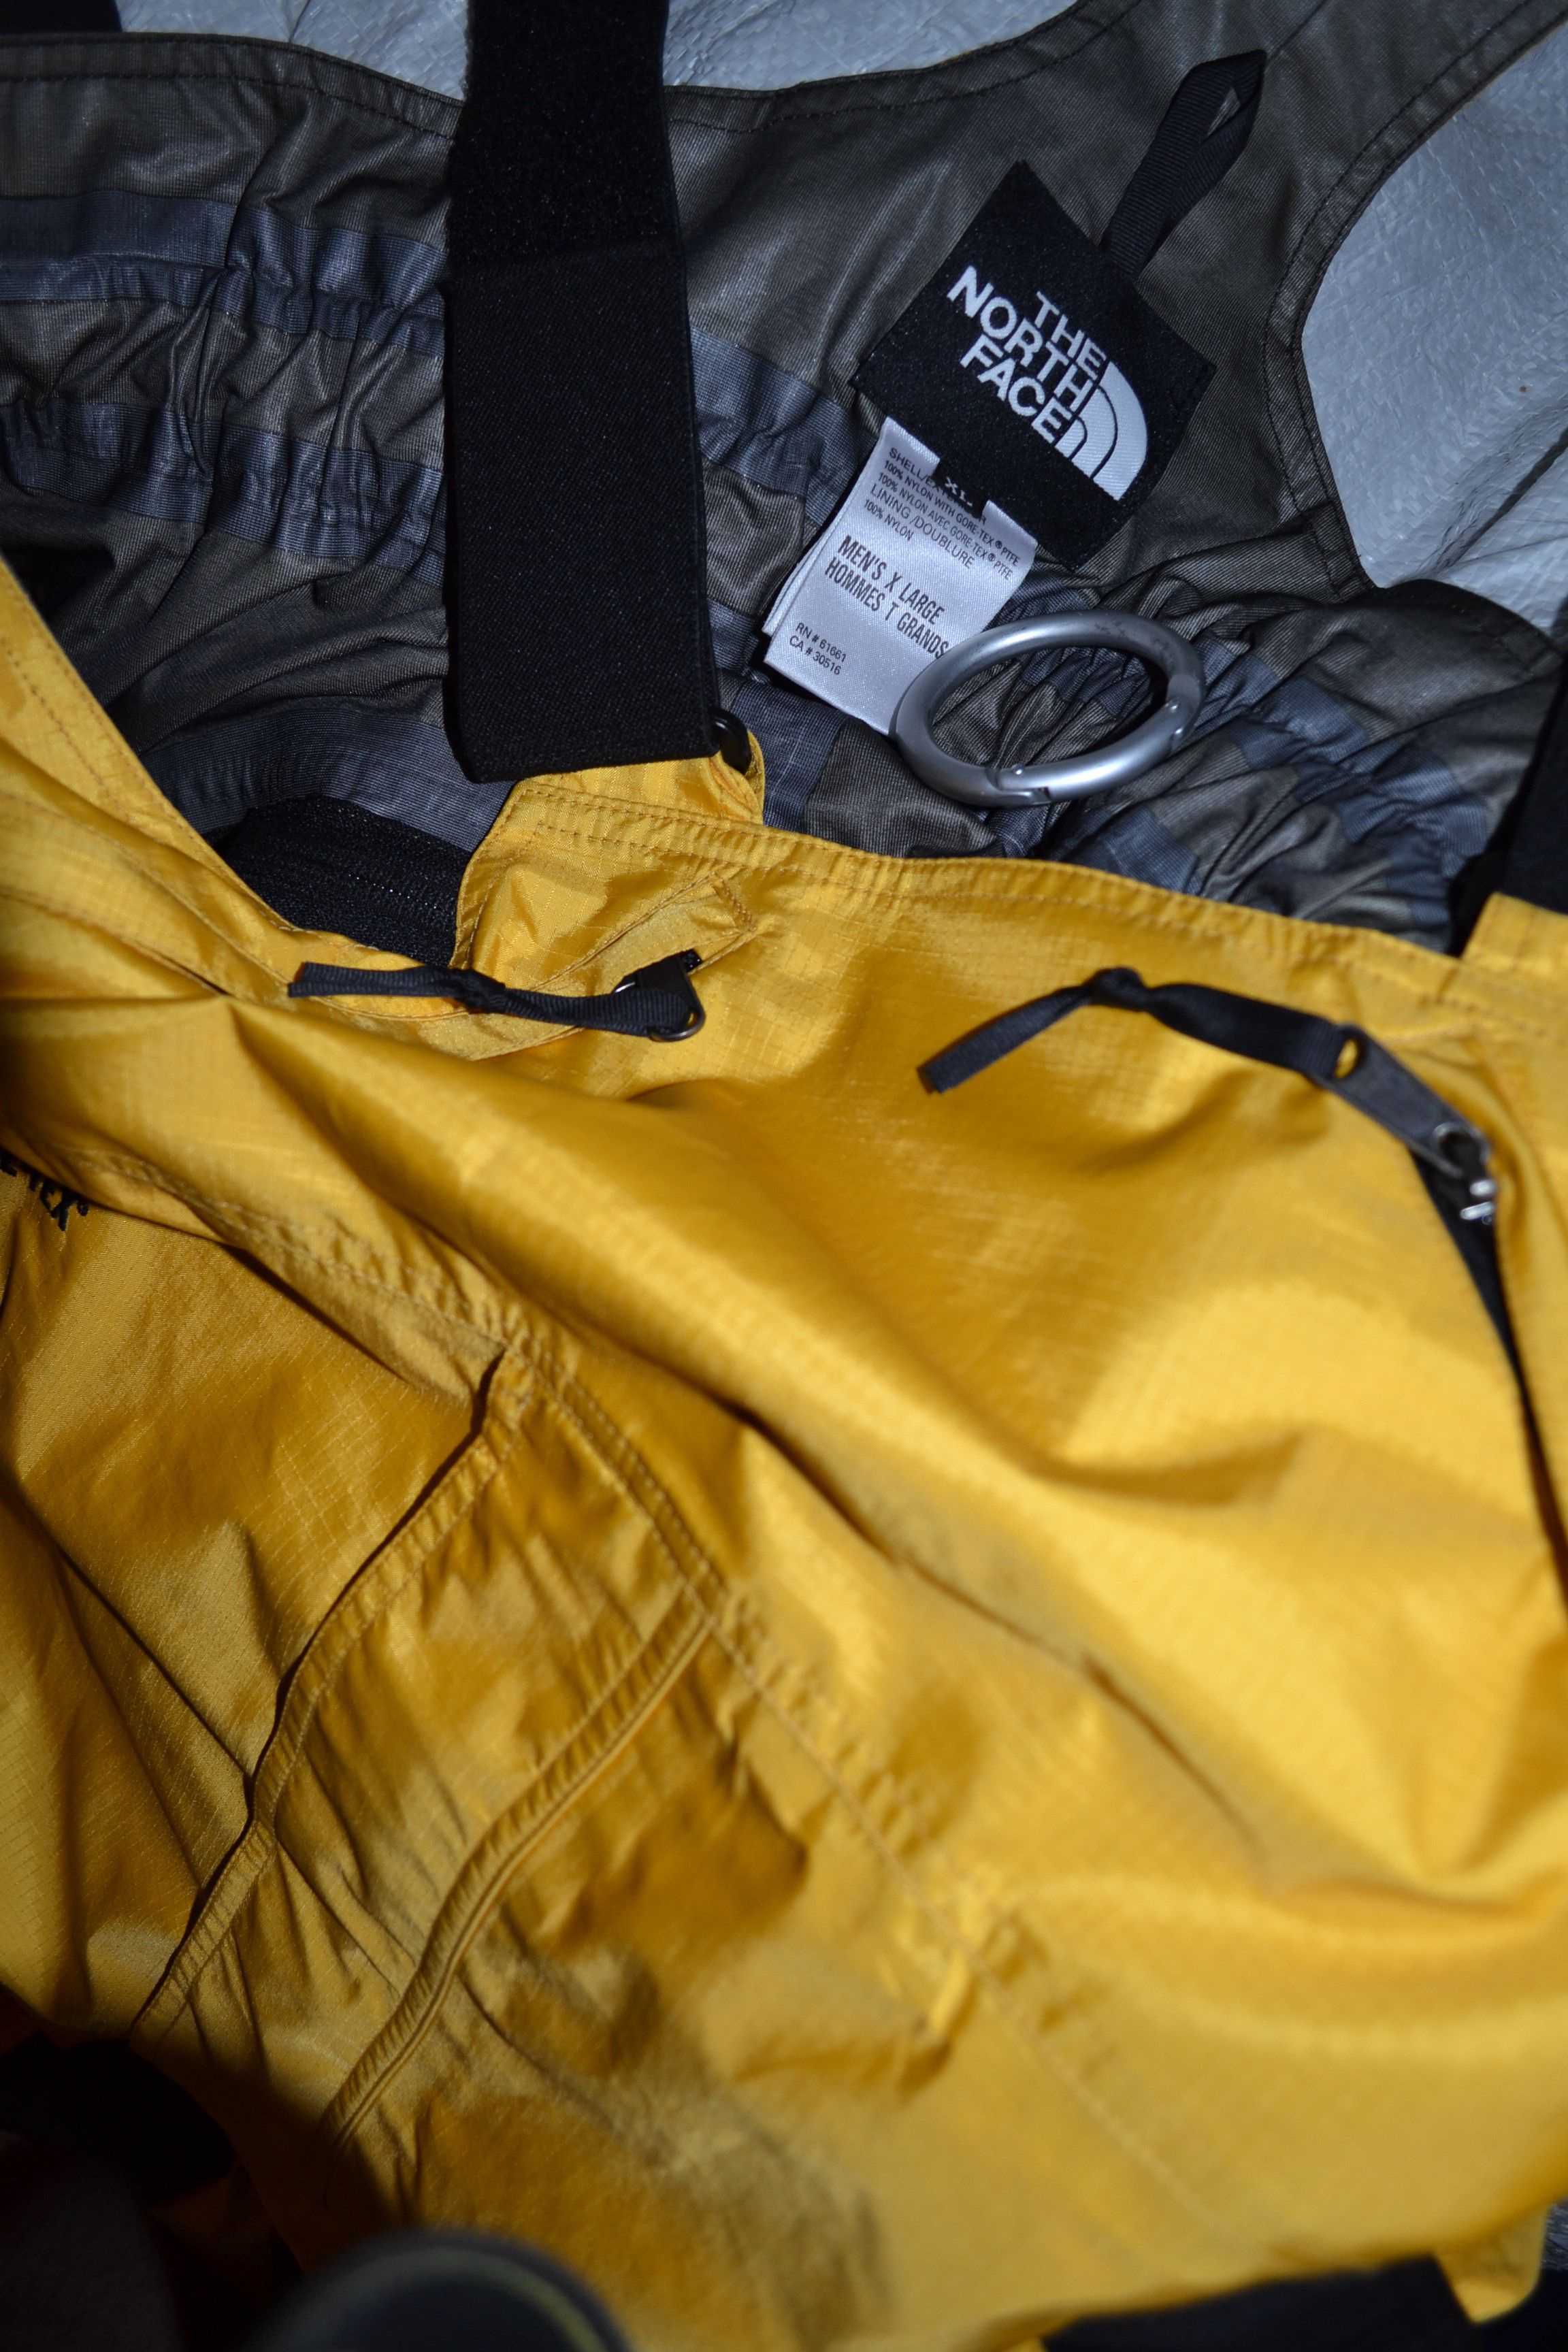 The North Face The North Face Vintage BIB XL Overall Yellow Ripstop Gore-tex Deadstock Winter Hardshell Suit Rare Supreme 90s piece Karakoram Salopette Size US 36 / EU 52 - 3 Thumbnail